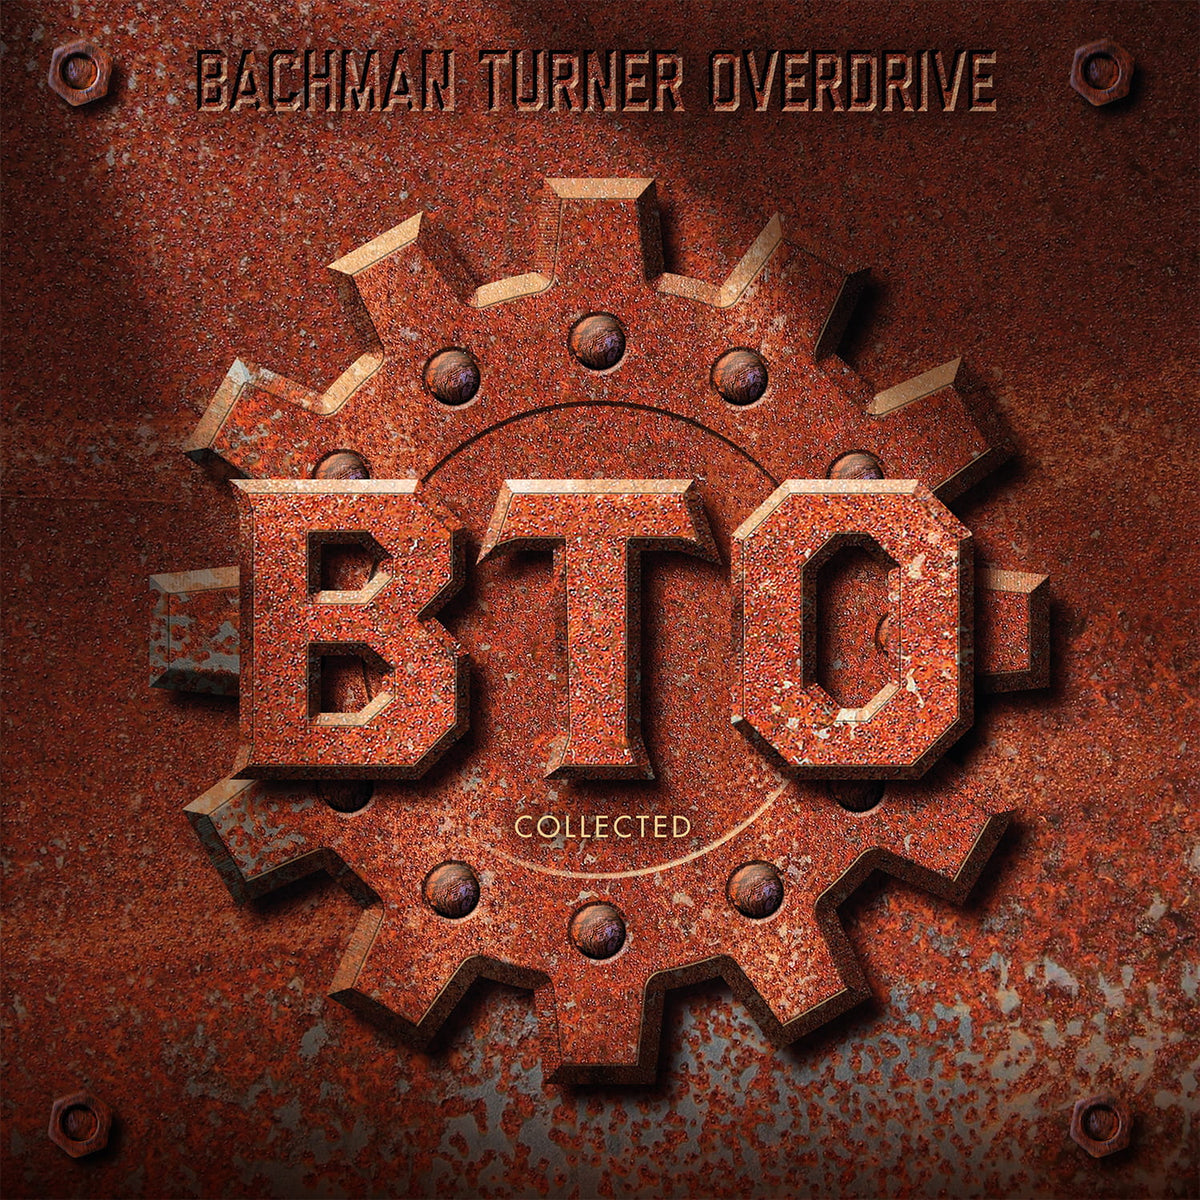 Bachman-Turner Overdrive - Collected: Greatest Songs 1973-1996